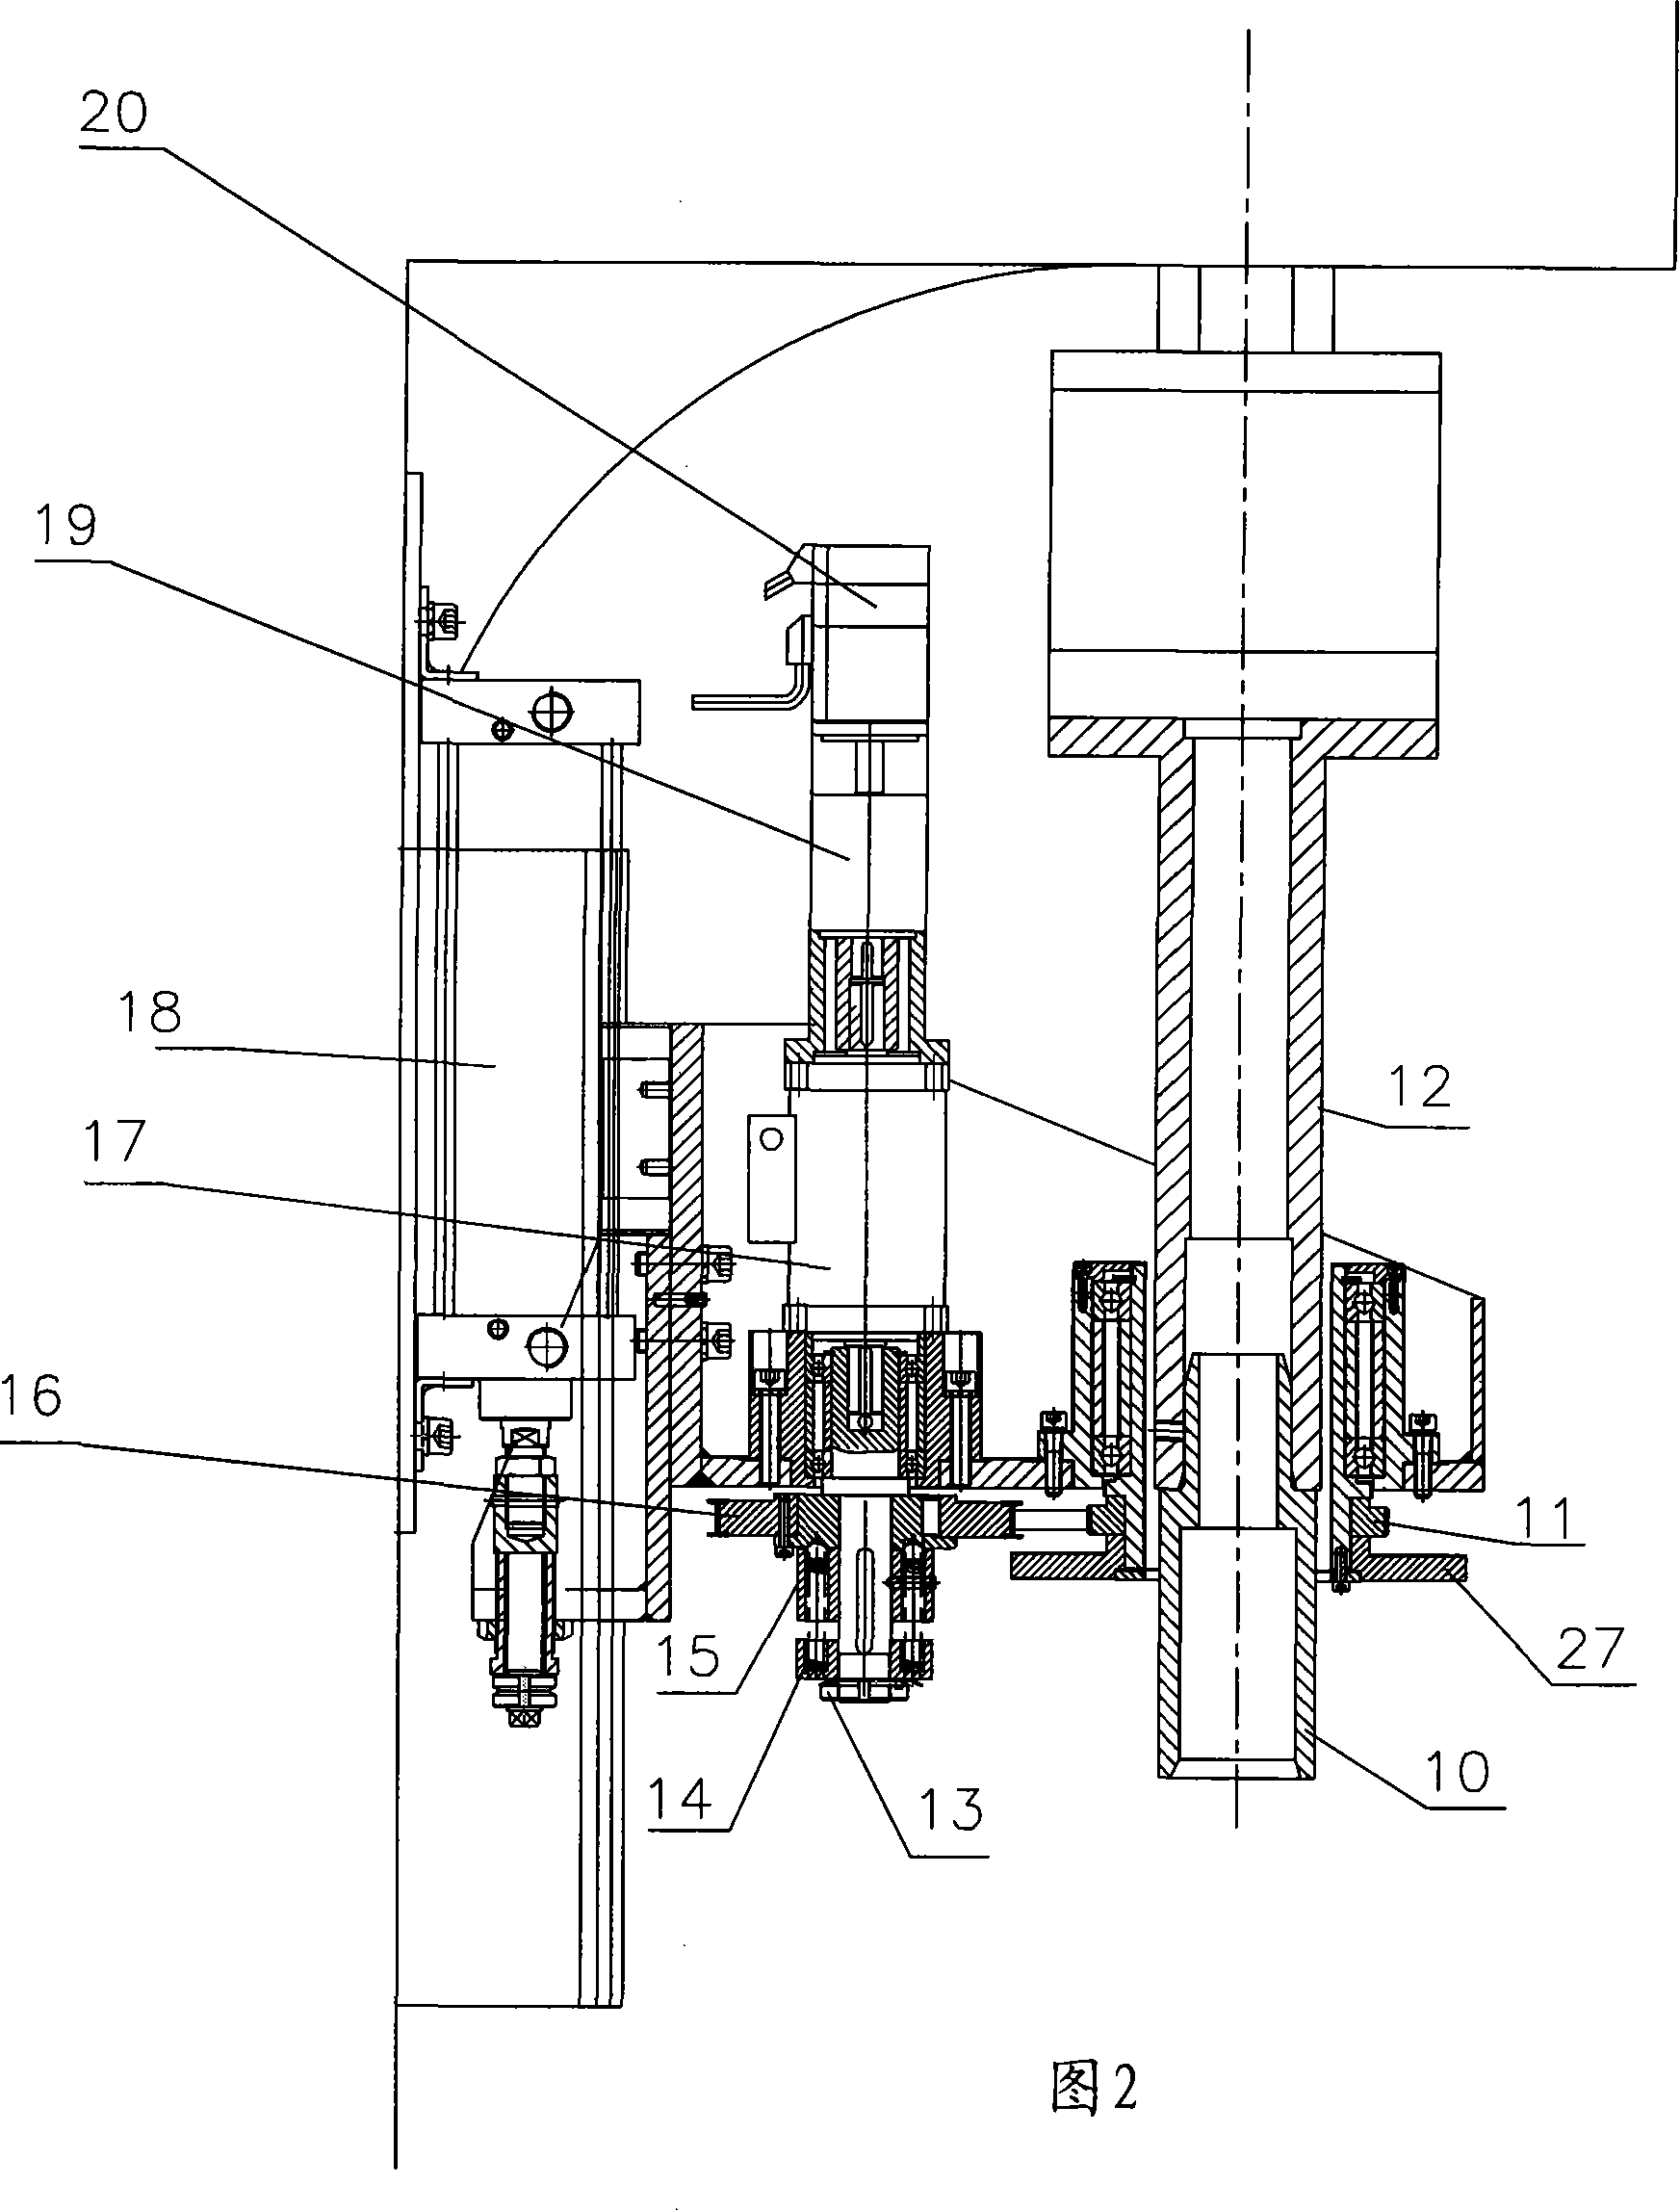 Measuring mechanism for assembling and press-loading vehicle main reducing gear